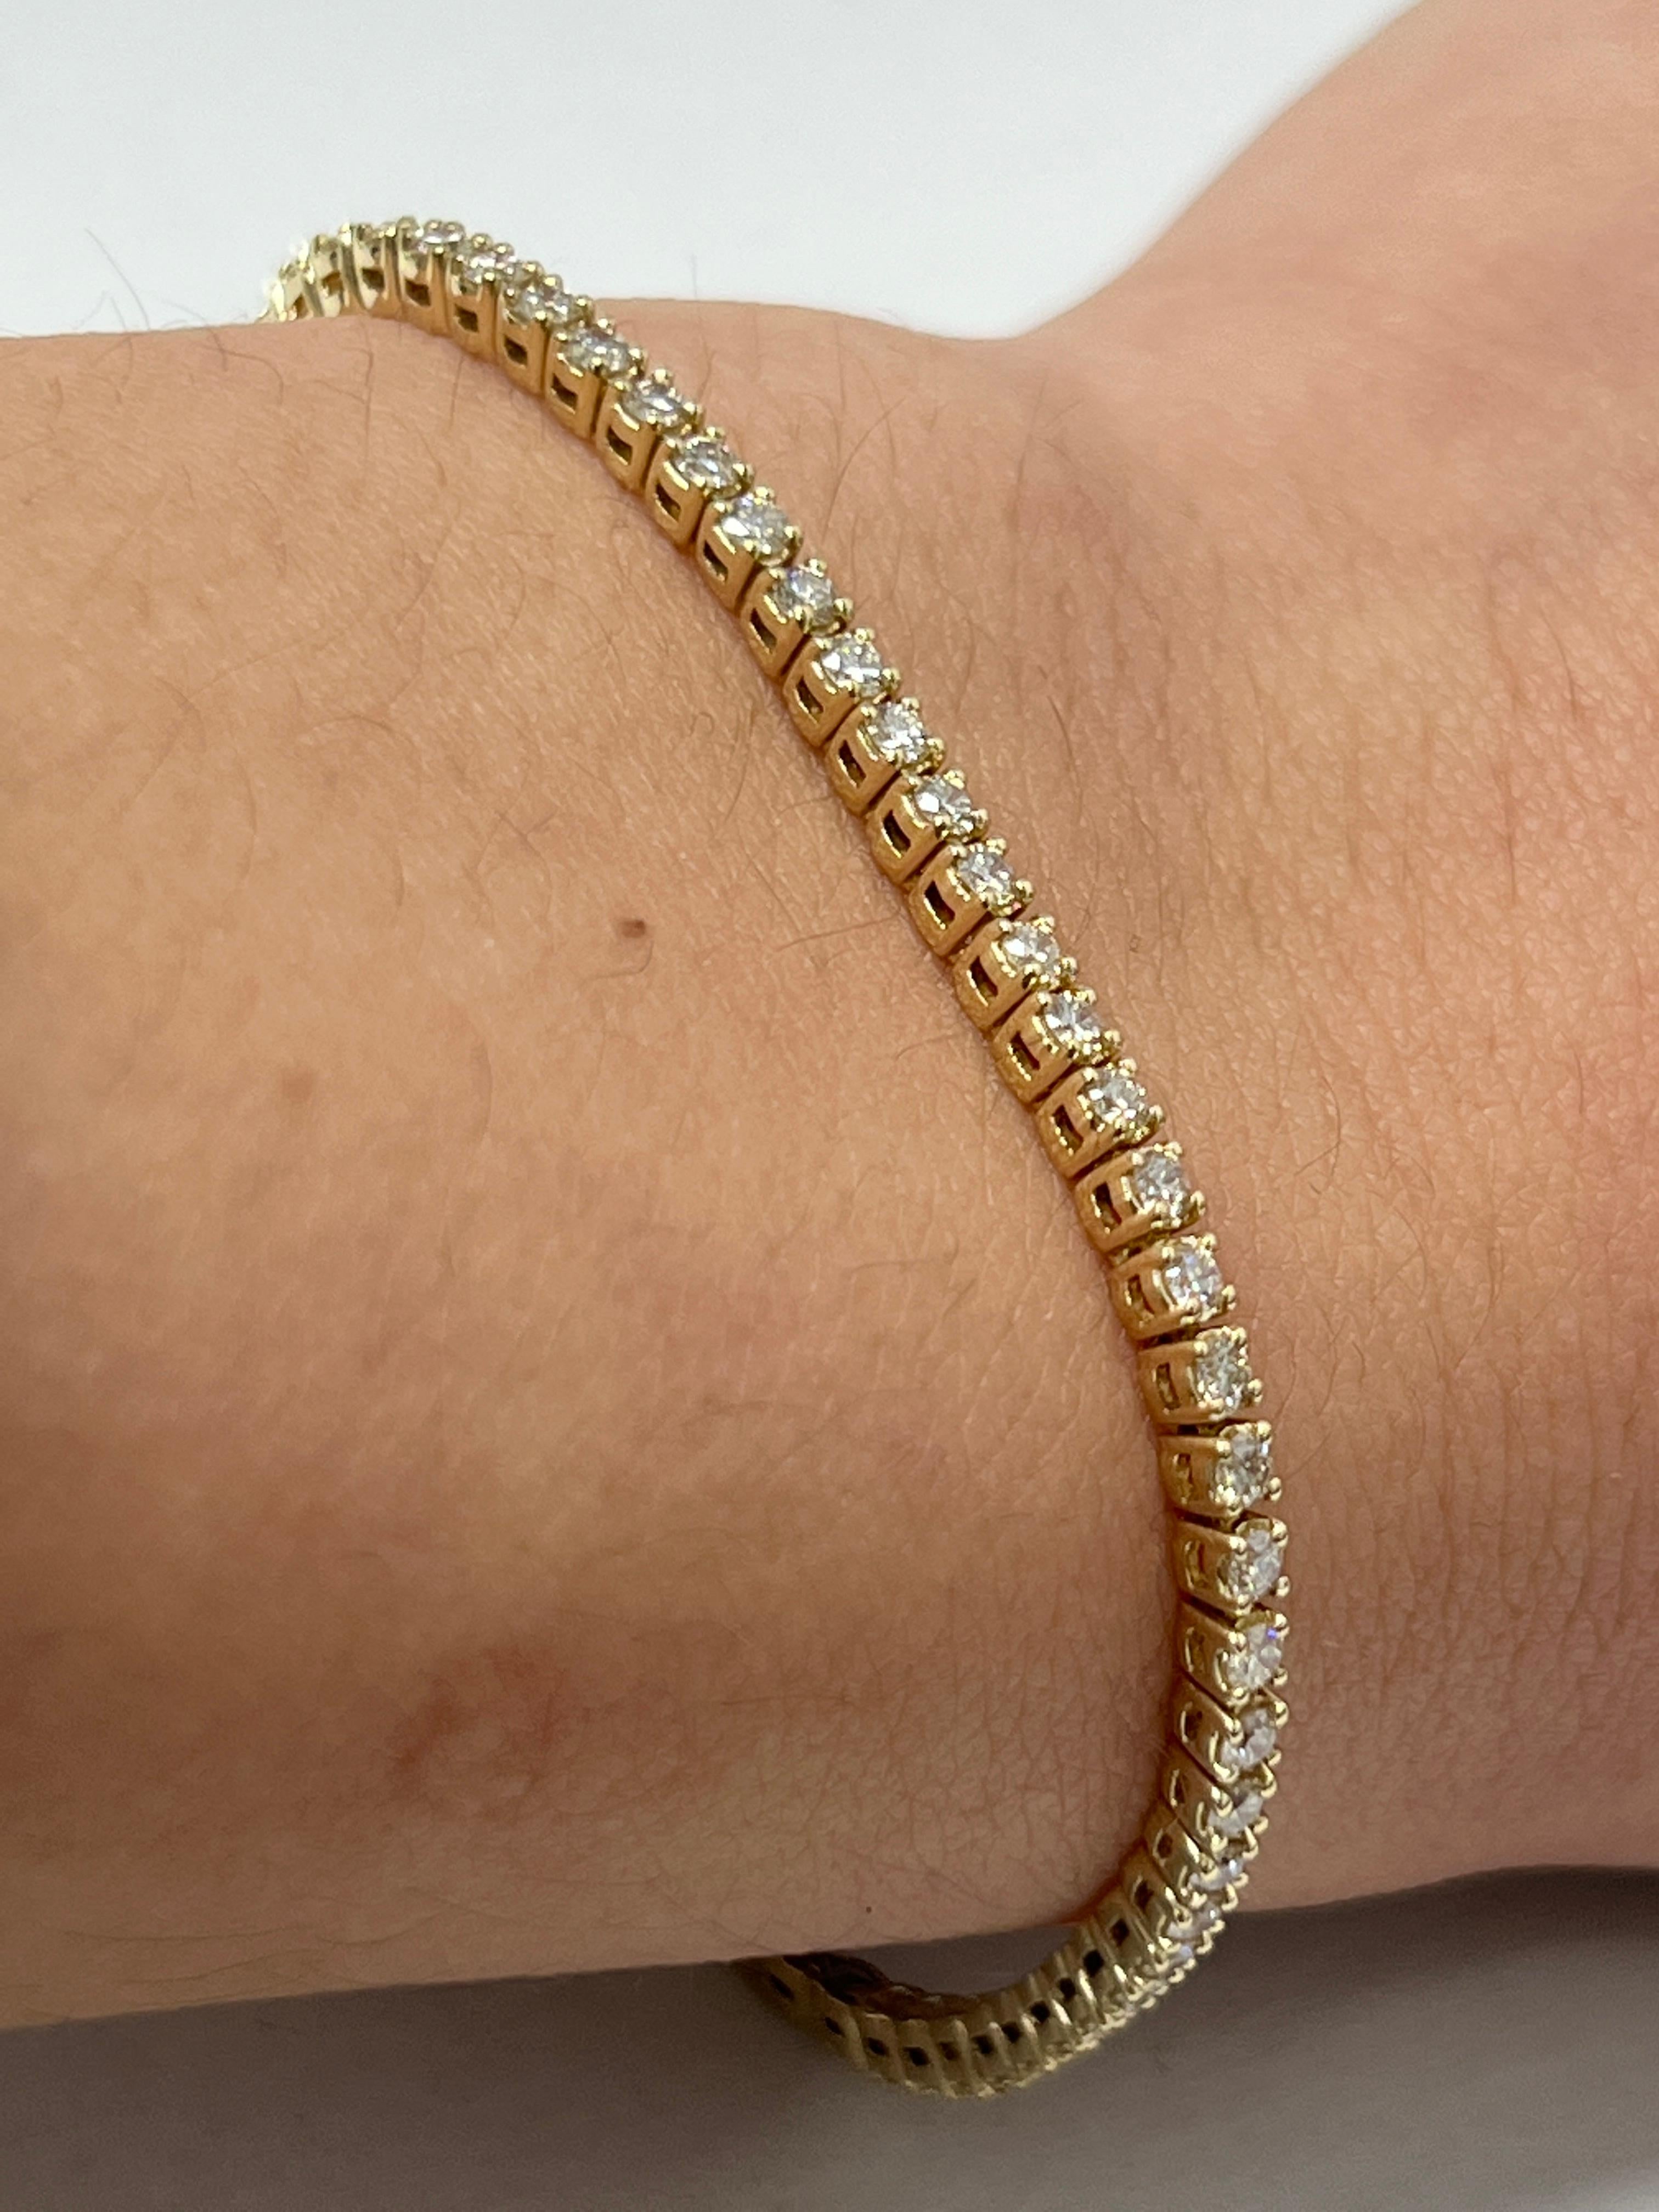 Fashion and glam are at the forefront with this exquisite diamond bracelet. This 14-karat yellow gold diamond bracelet is made from 8.7 grams of gold. The top is adorned with one row of I-J color, VS/SI clarity diamonds. This bracelet carries 69